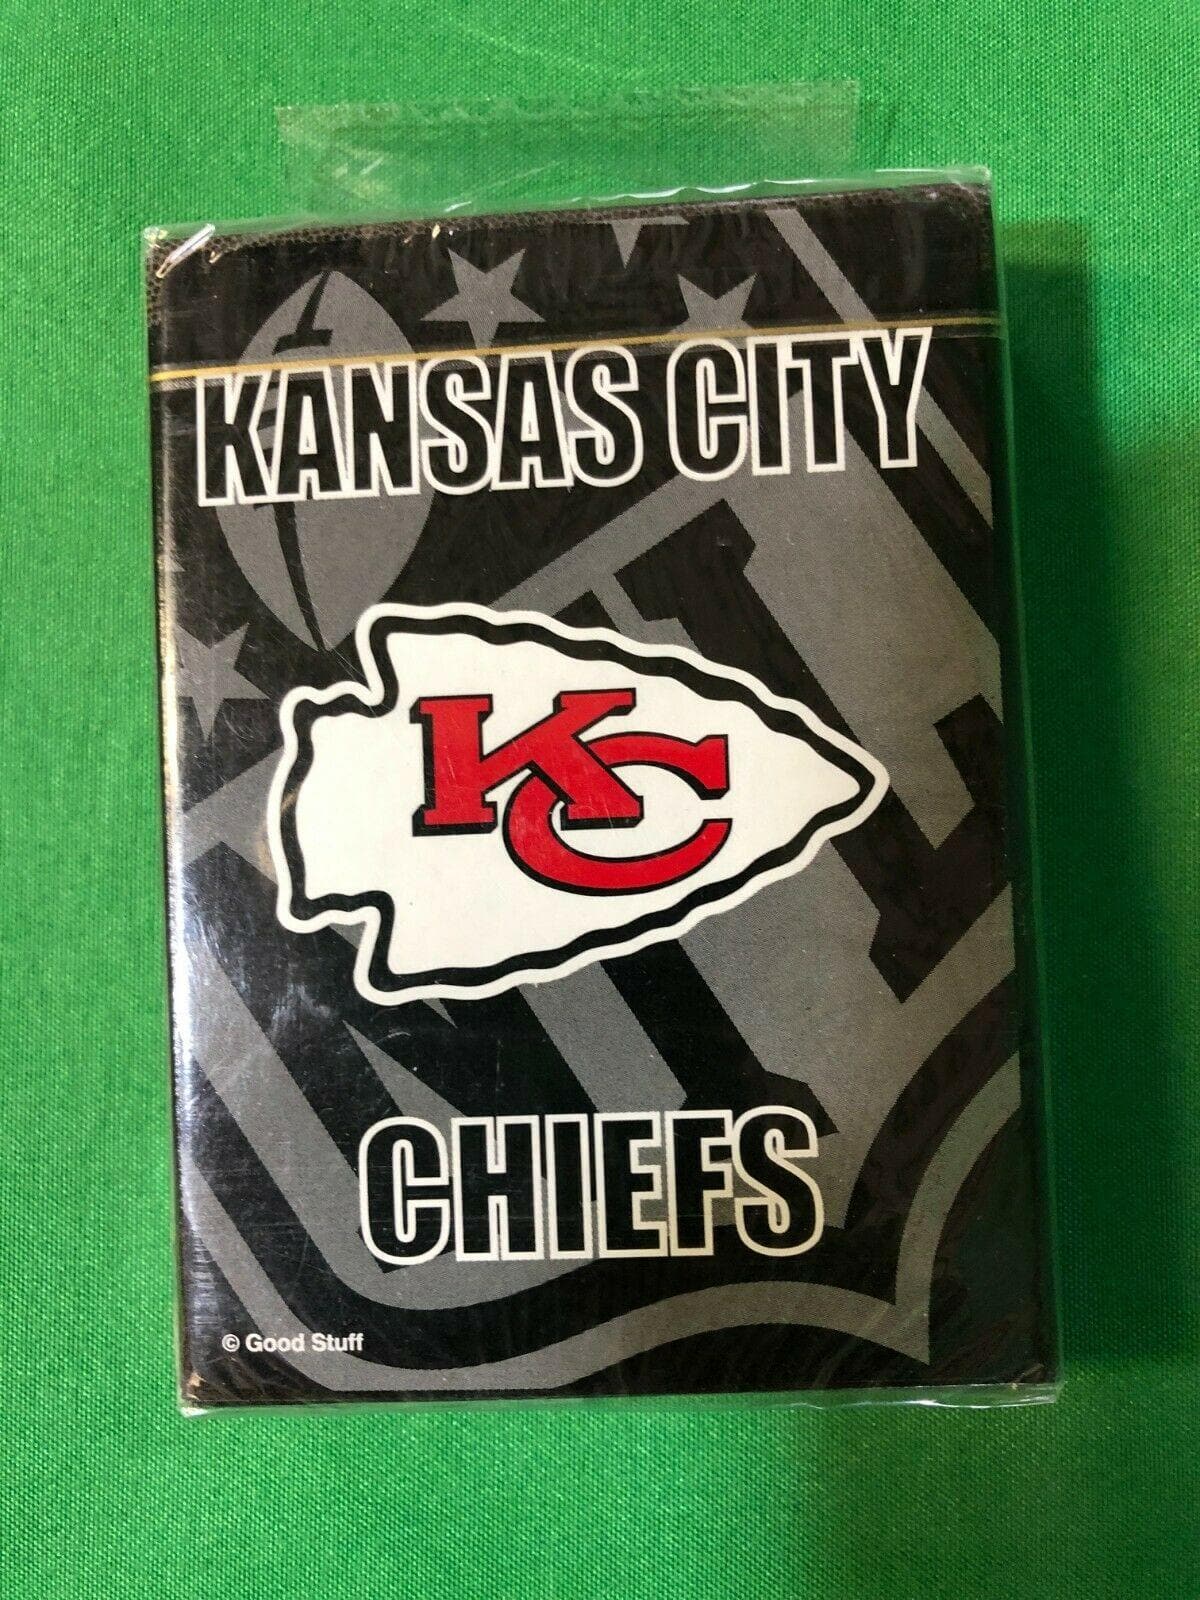 NFL Kansas City Chiefs Playing Cards NWT